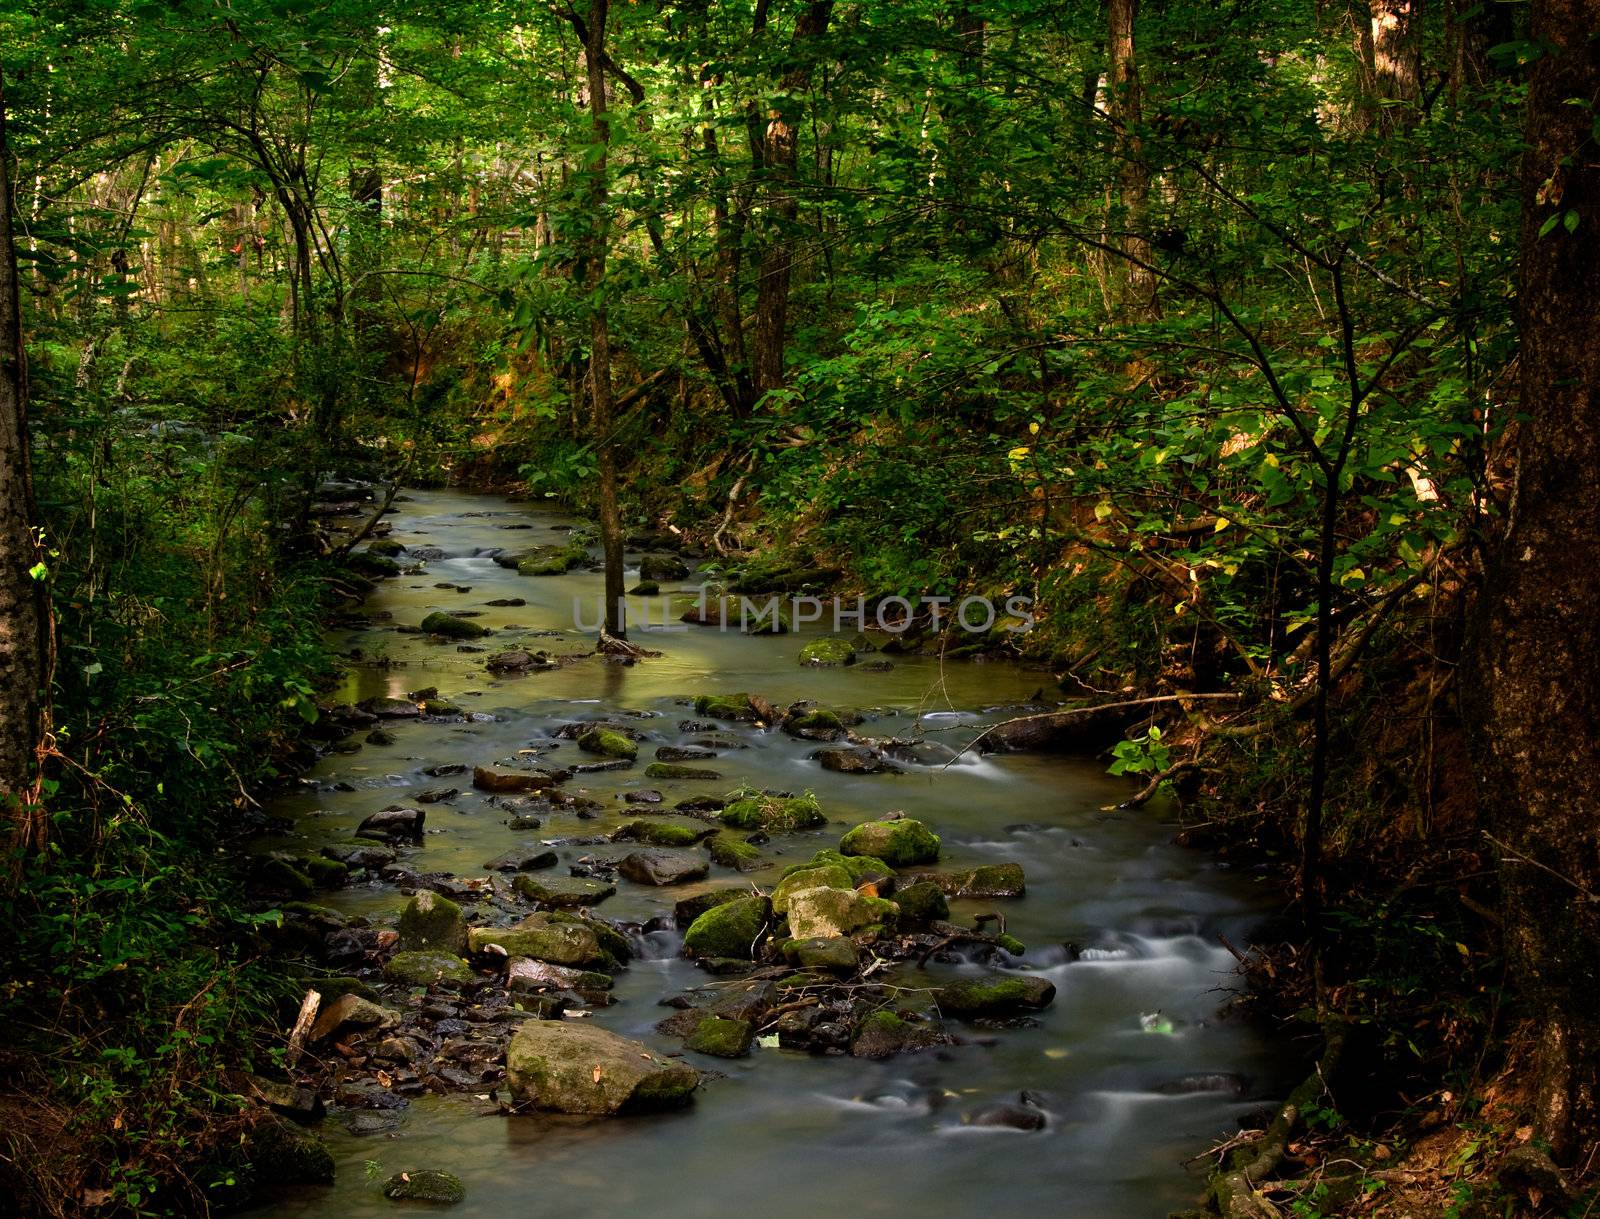 A small creek taken with long exposure trickles through a wooded forest